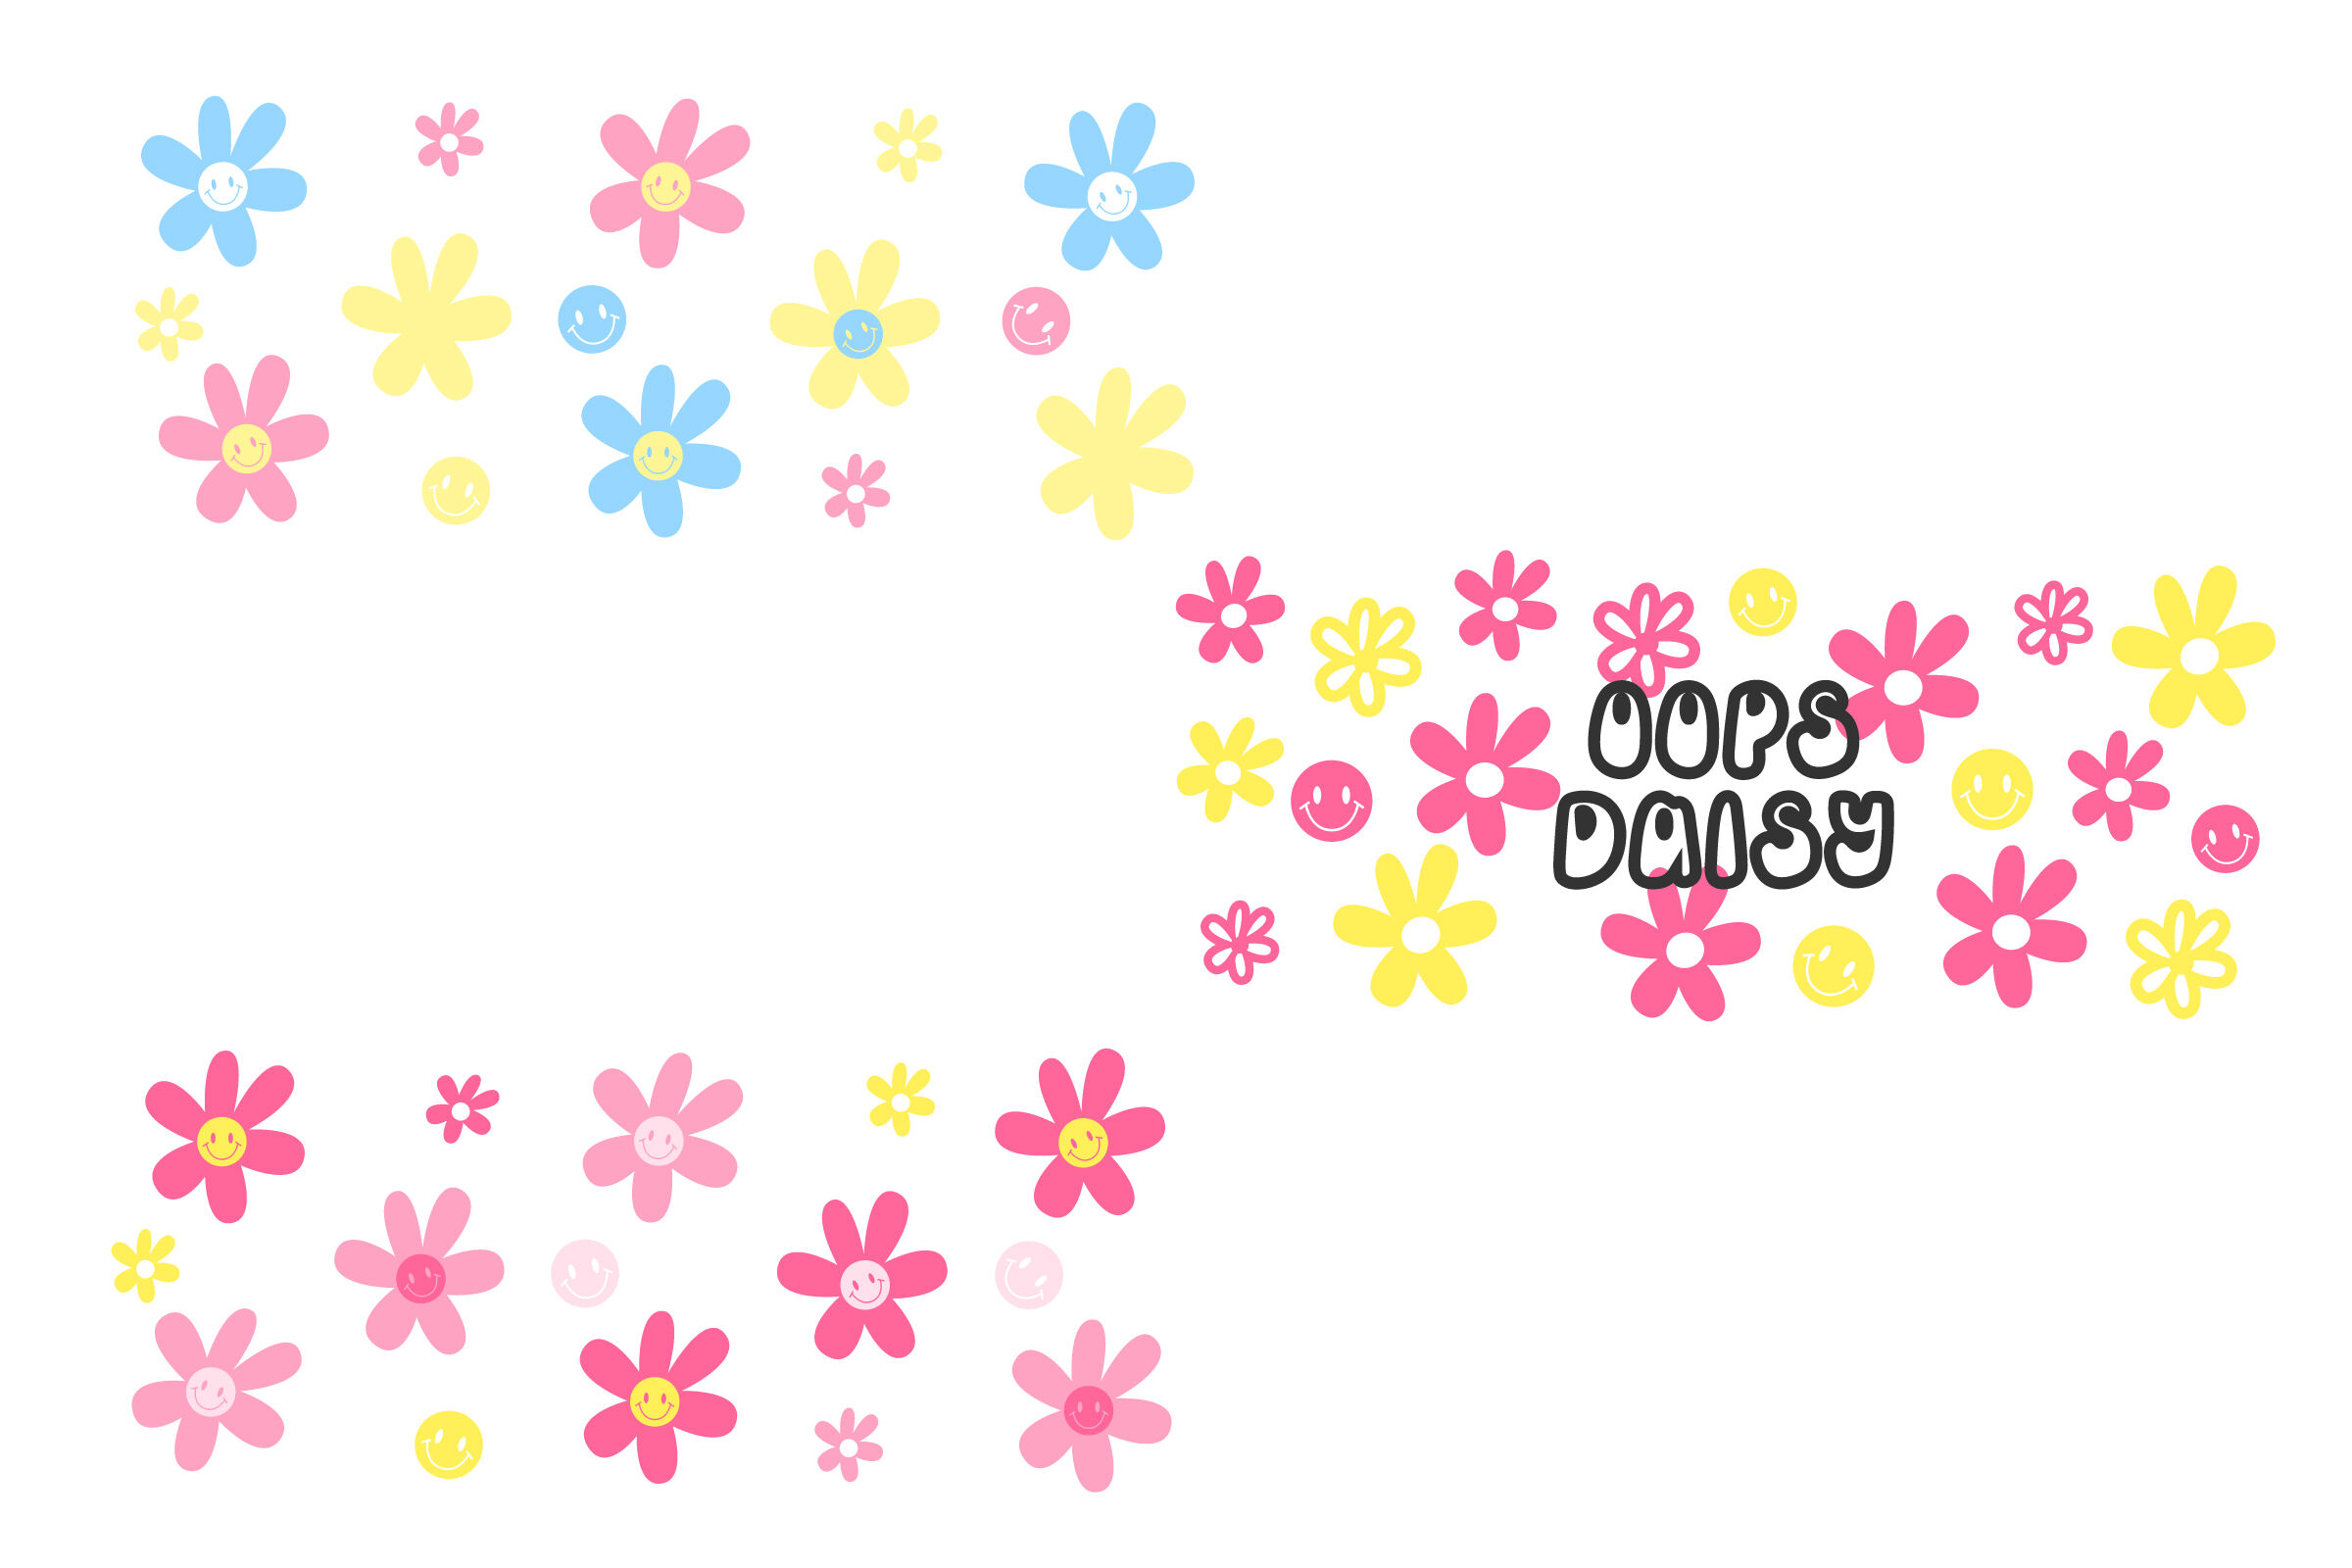 Daisy Can Glass Wrap, Beer Can Glass Svg Graphic by Ruby Siam